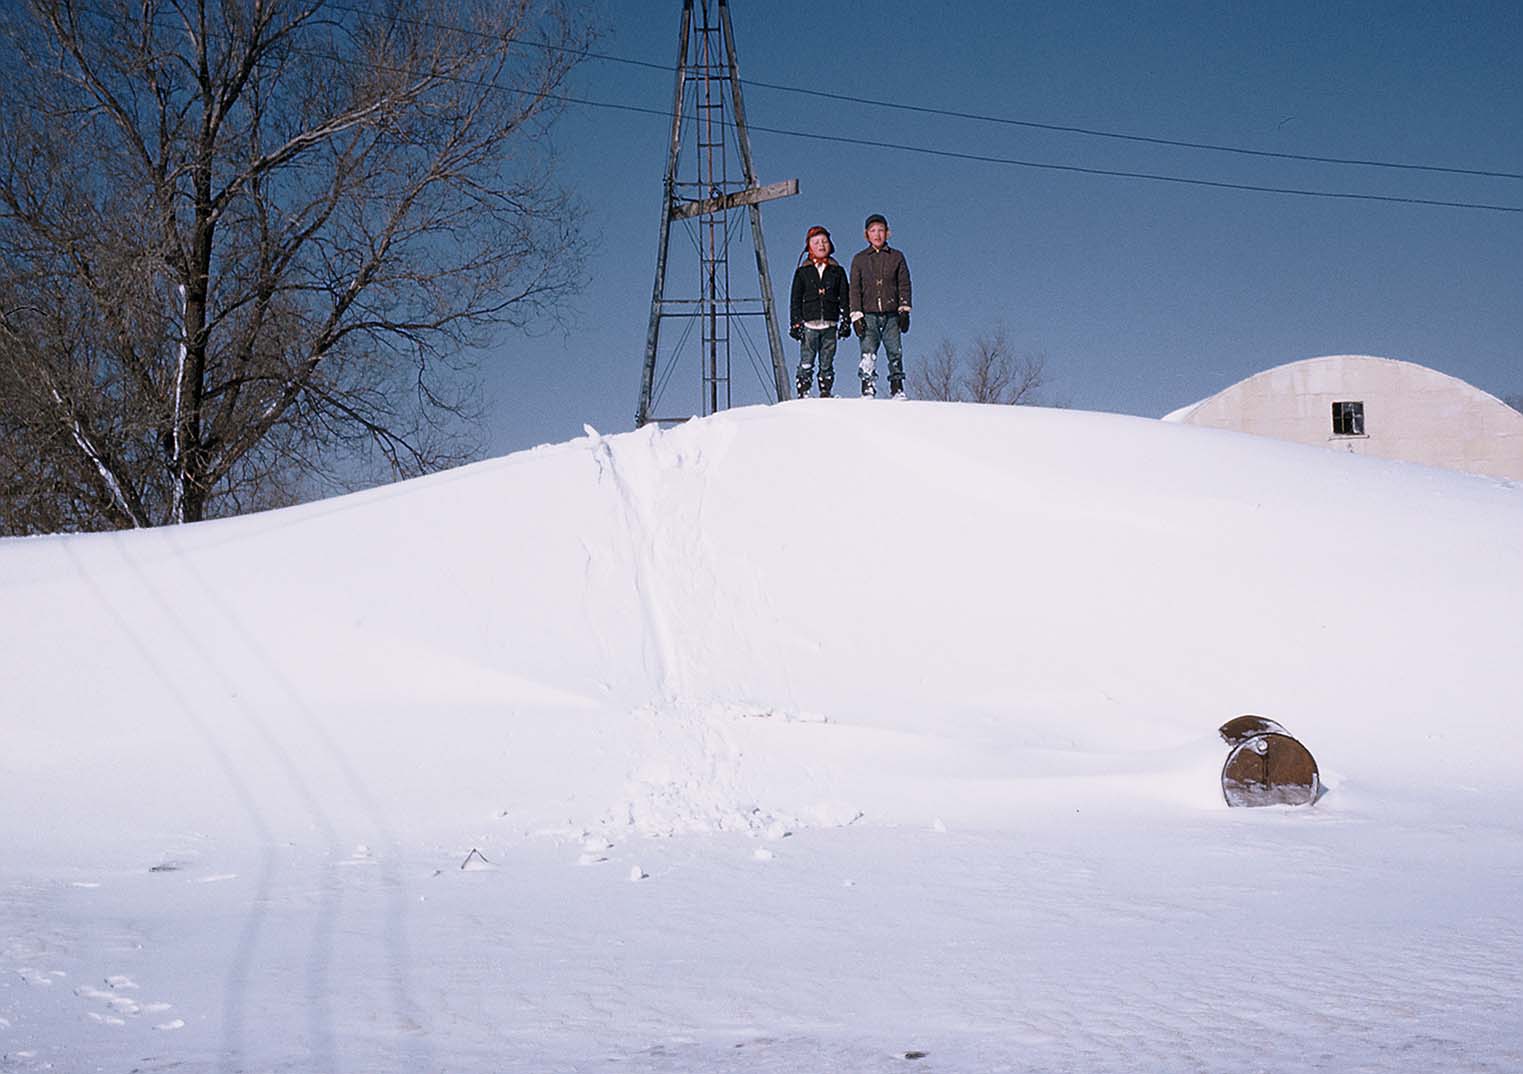 Kids standing on a snow drift that is covering the well house.